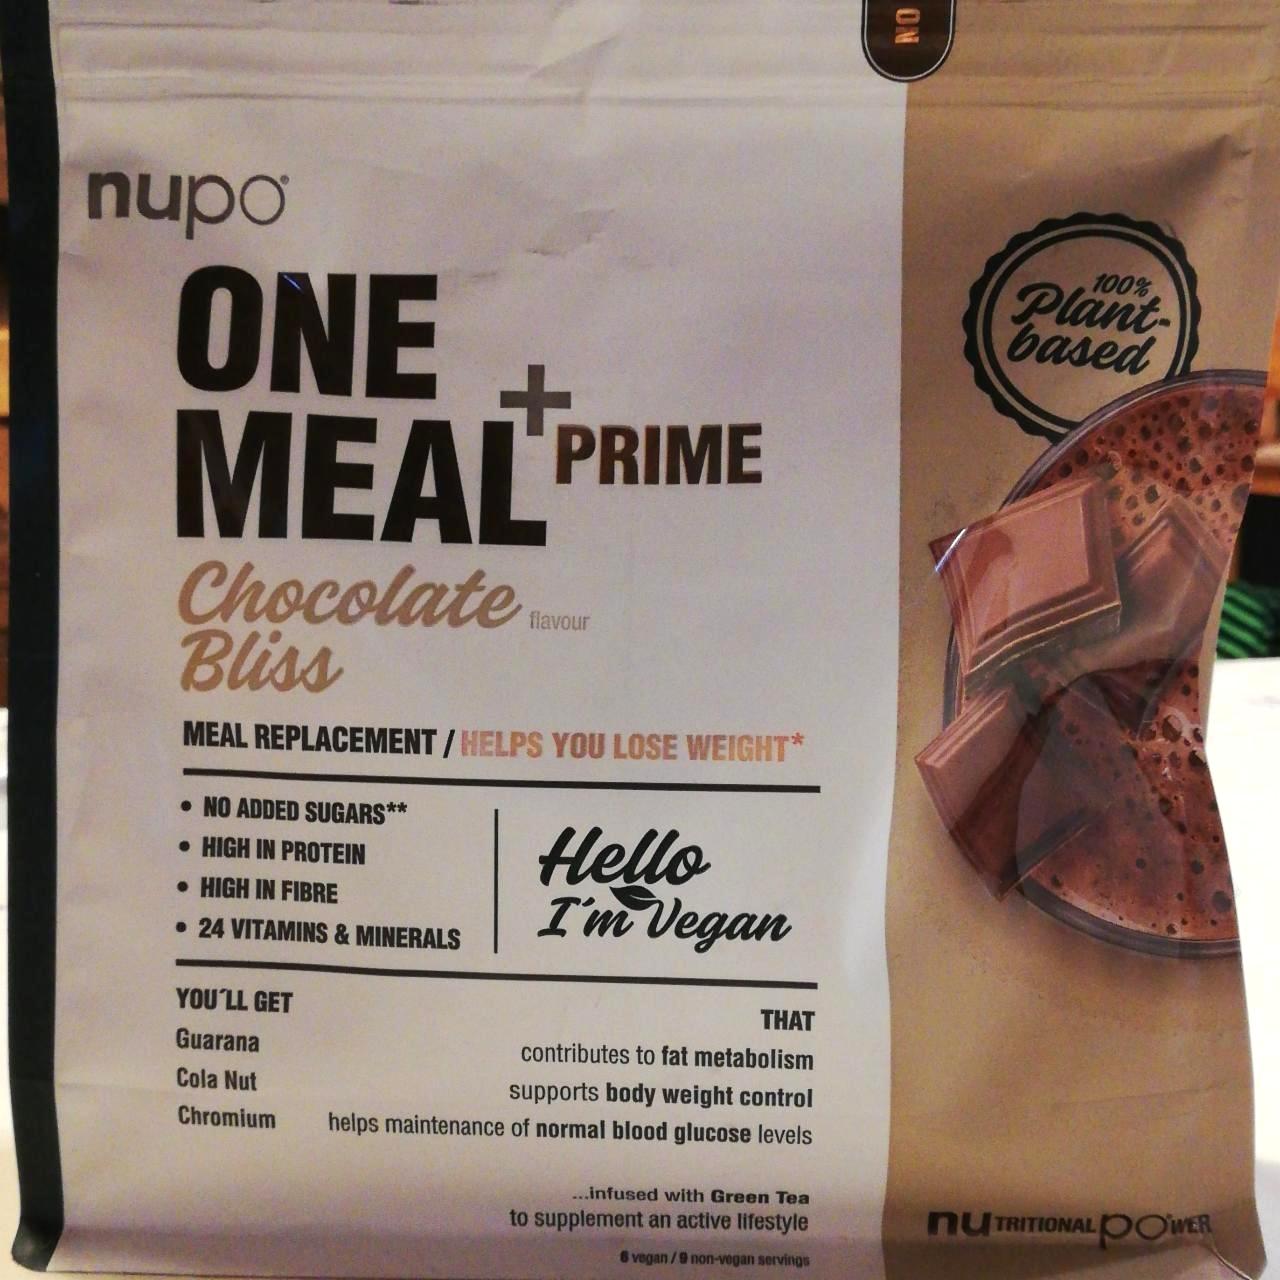 Képek - ONE MEAL +PRIME Chocolate Bliss nupo